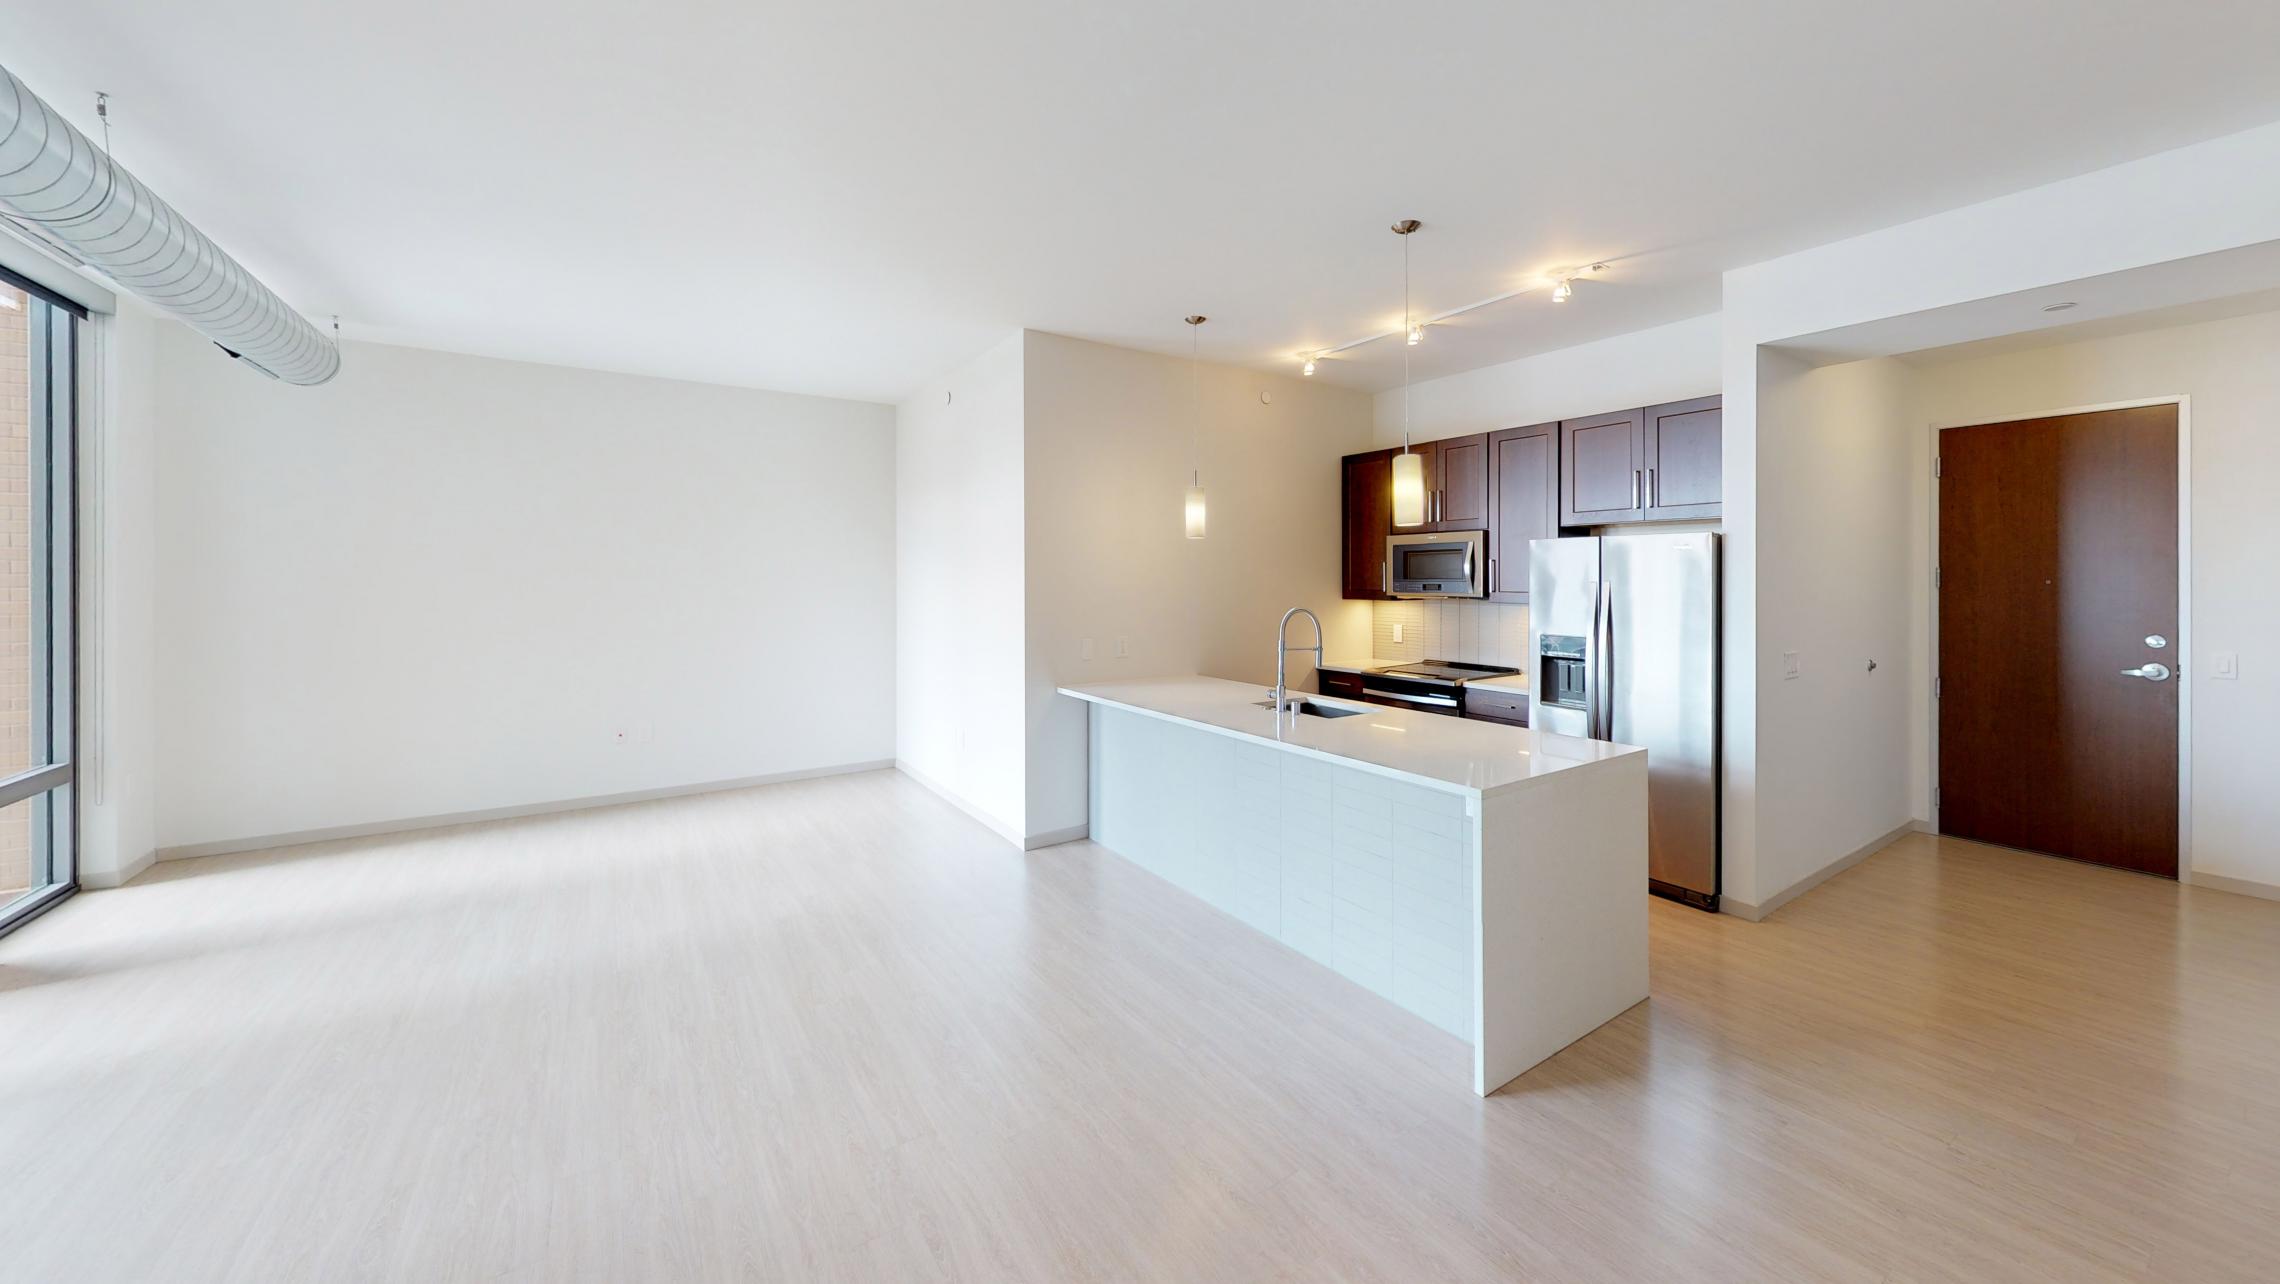 Pressman-Apartment-604-One-Bedroom-Balcony-City-View-Luxury-Downtown-Upscale-Modern-Downtown-Madison-Capitol-Square-Living-Room-Kitchen.jpg